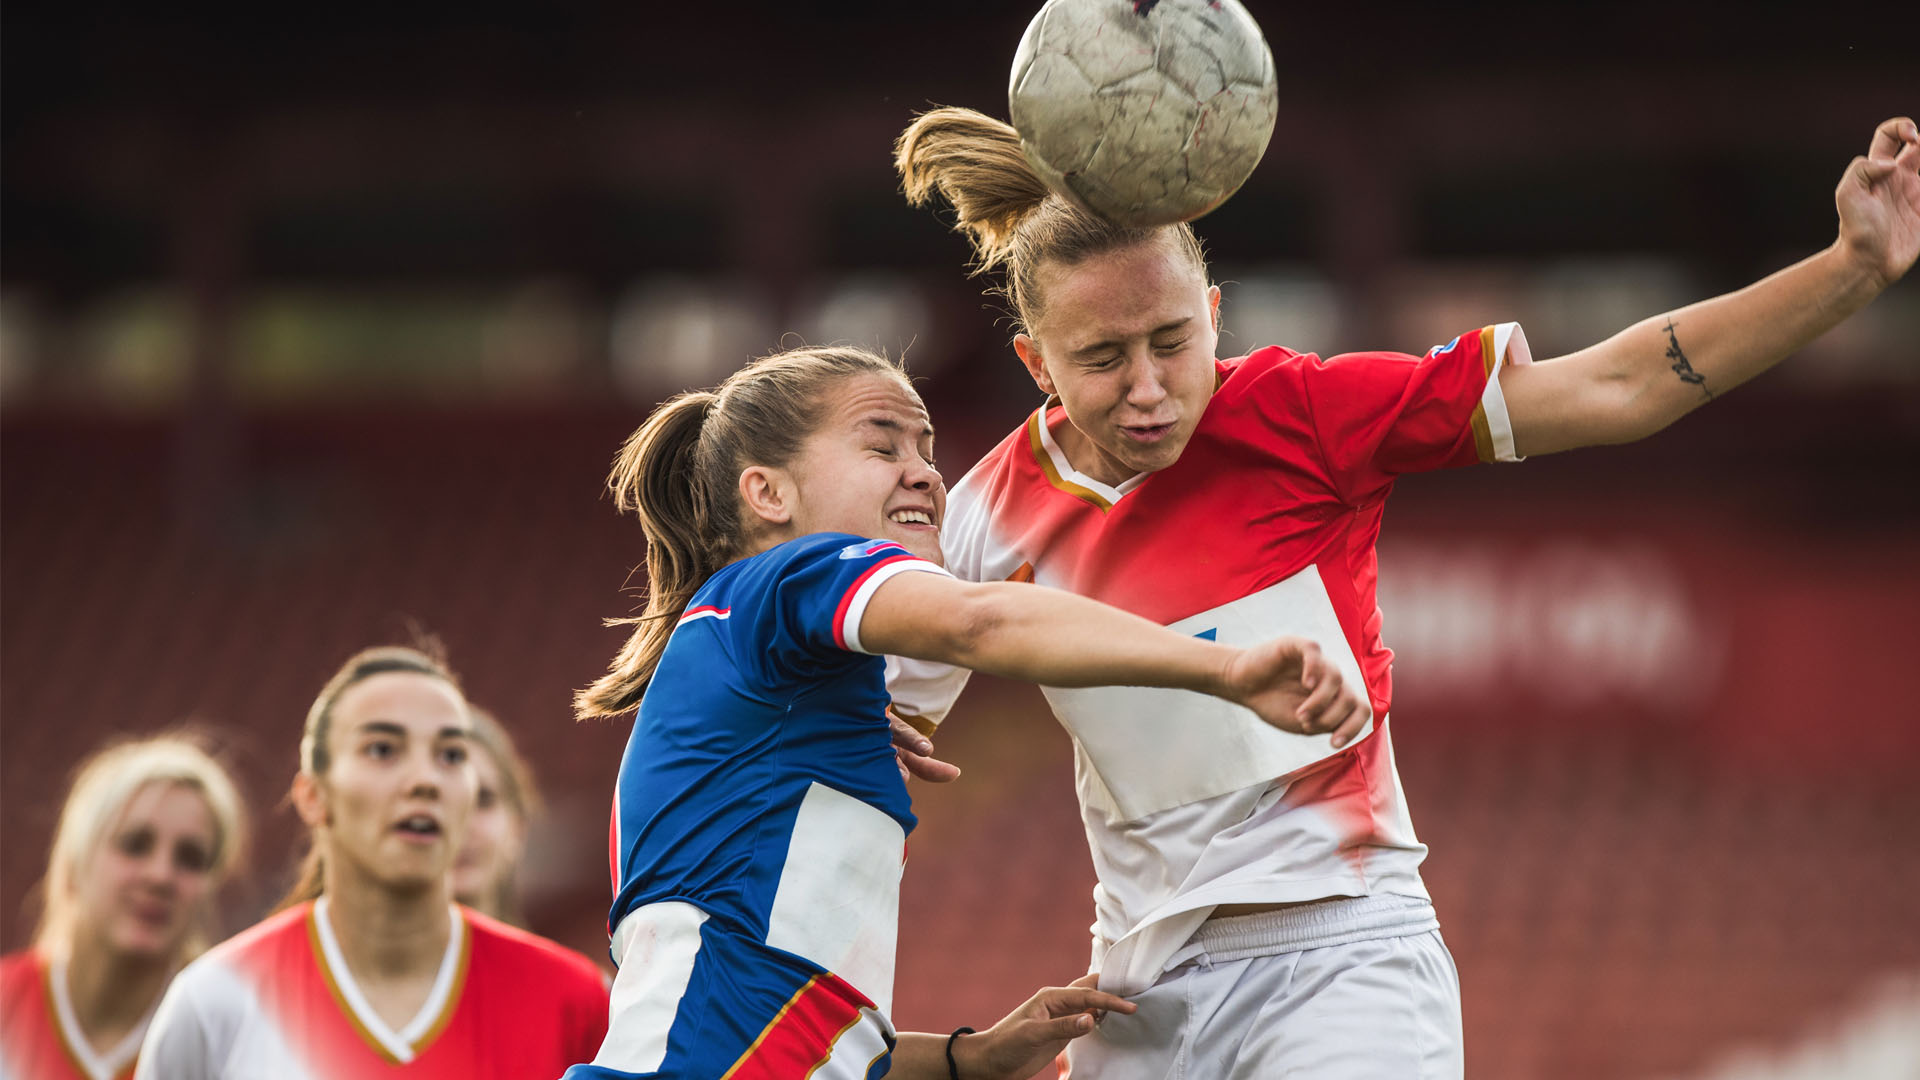 New Grant Supports Cognitive Risk-Benefit Analysis of Playing Soccer